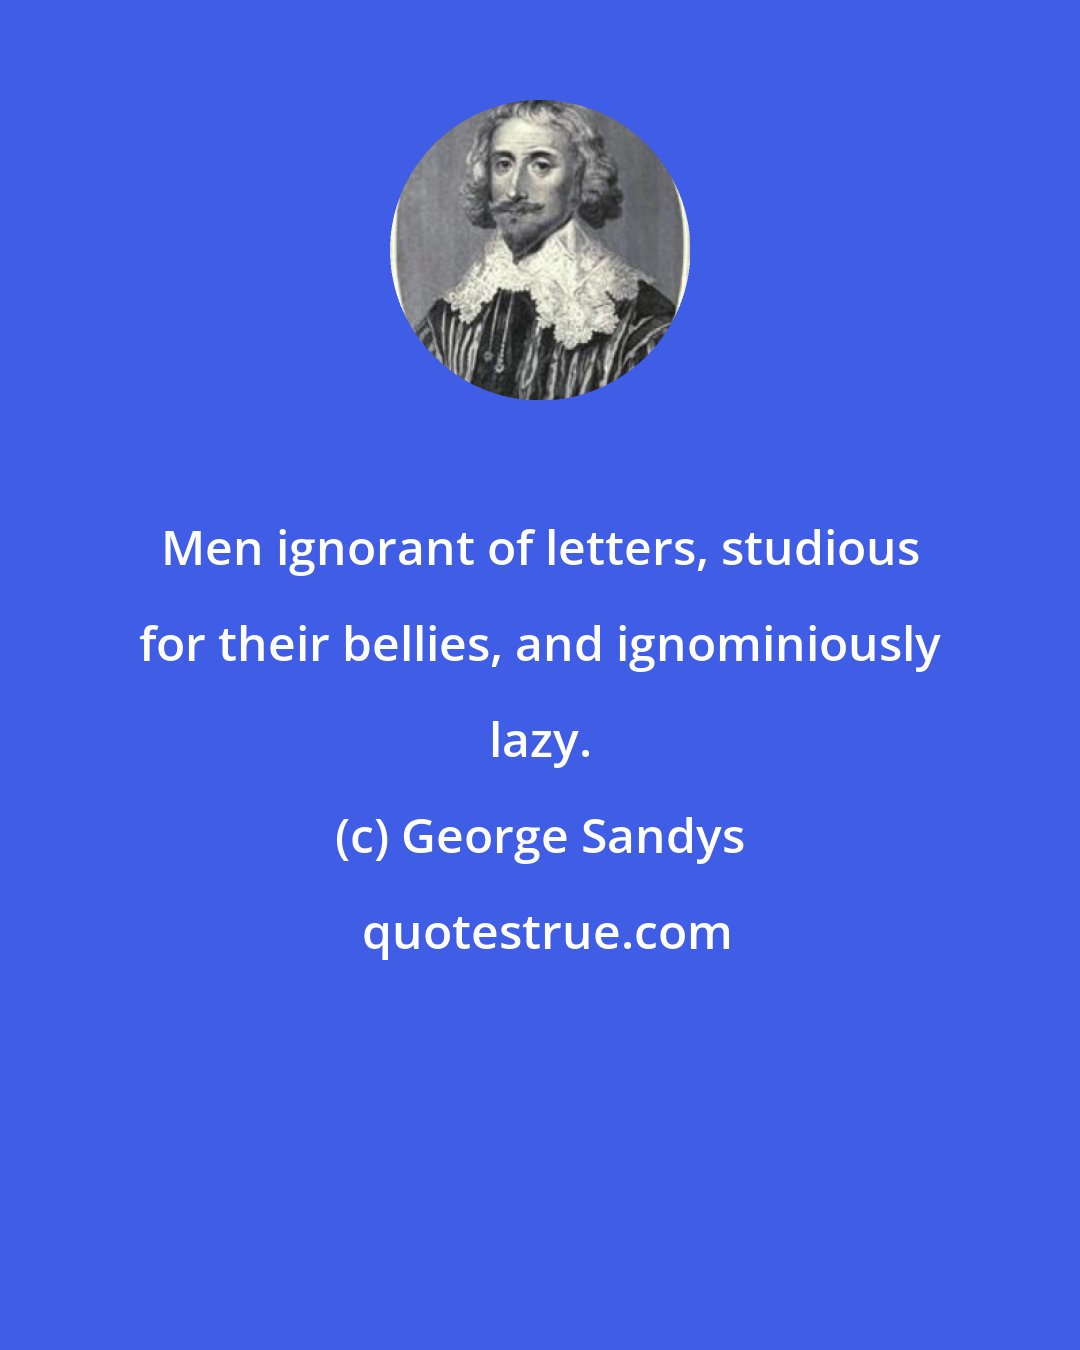 George Sandys: Men ignorant of letters, studious for their bellies, and ignominiously lazy.